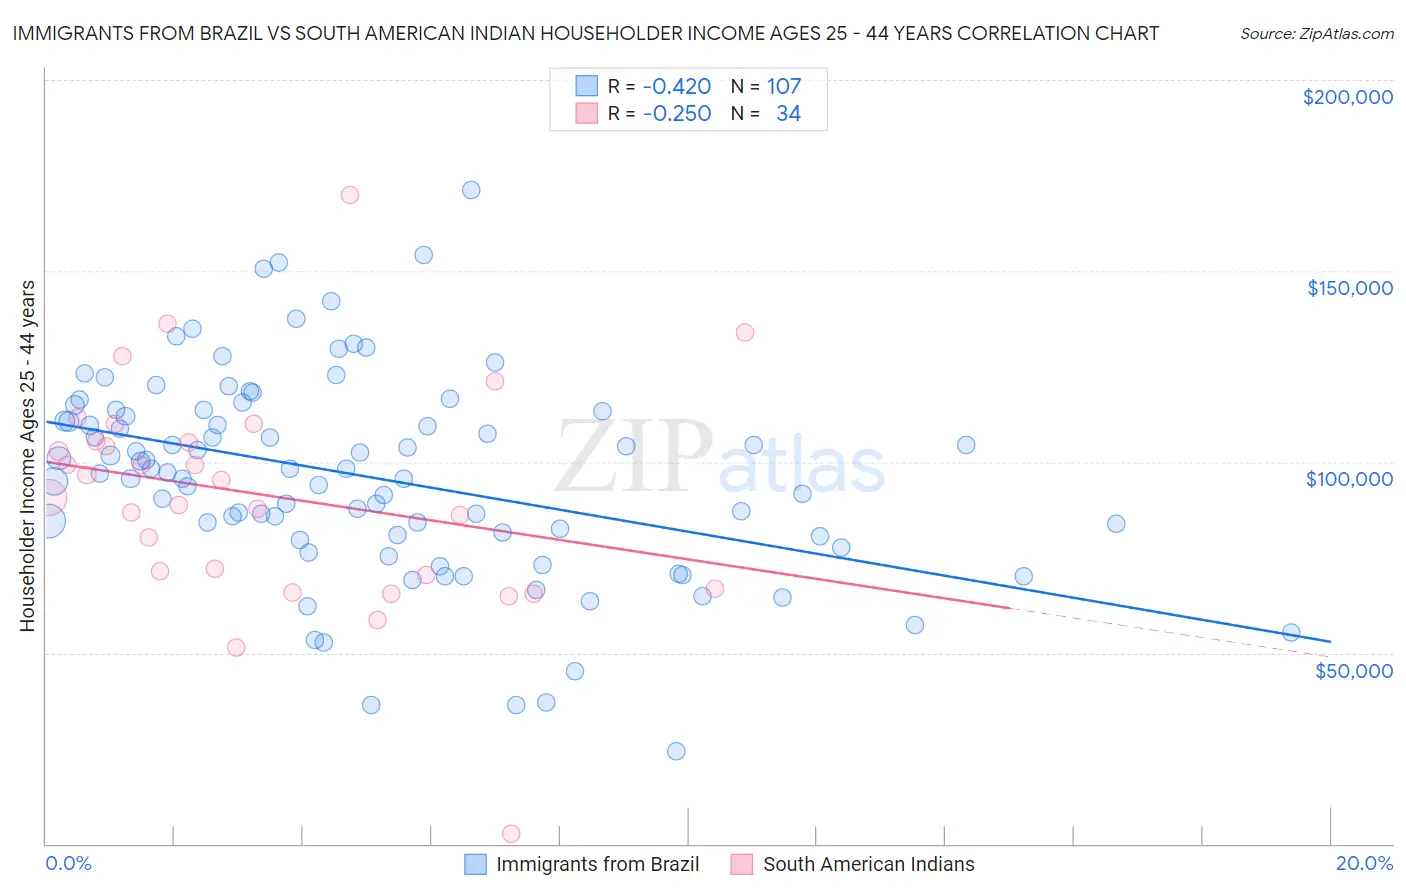 Immigrants from Brazil vs South American Indian Householder Income Ages 25 - 44 years